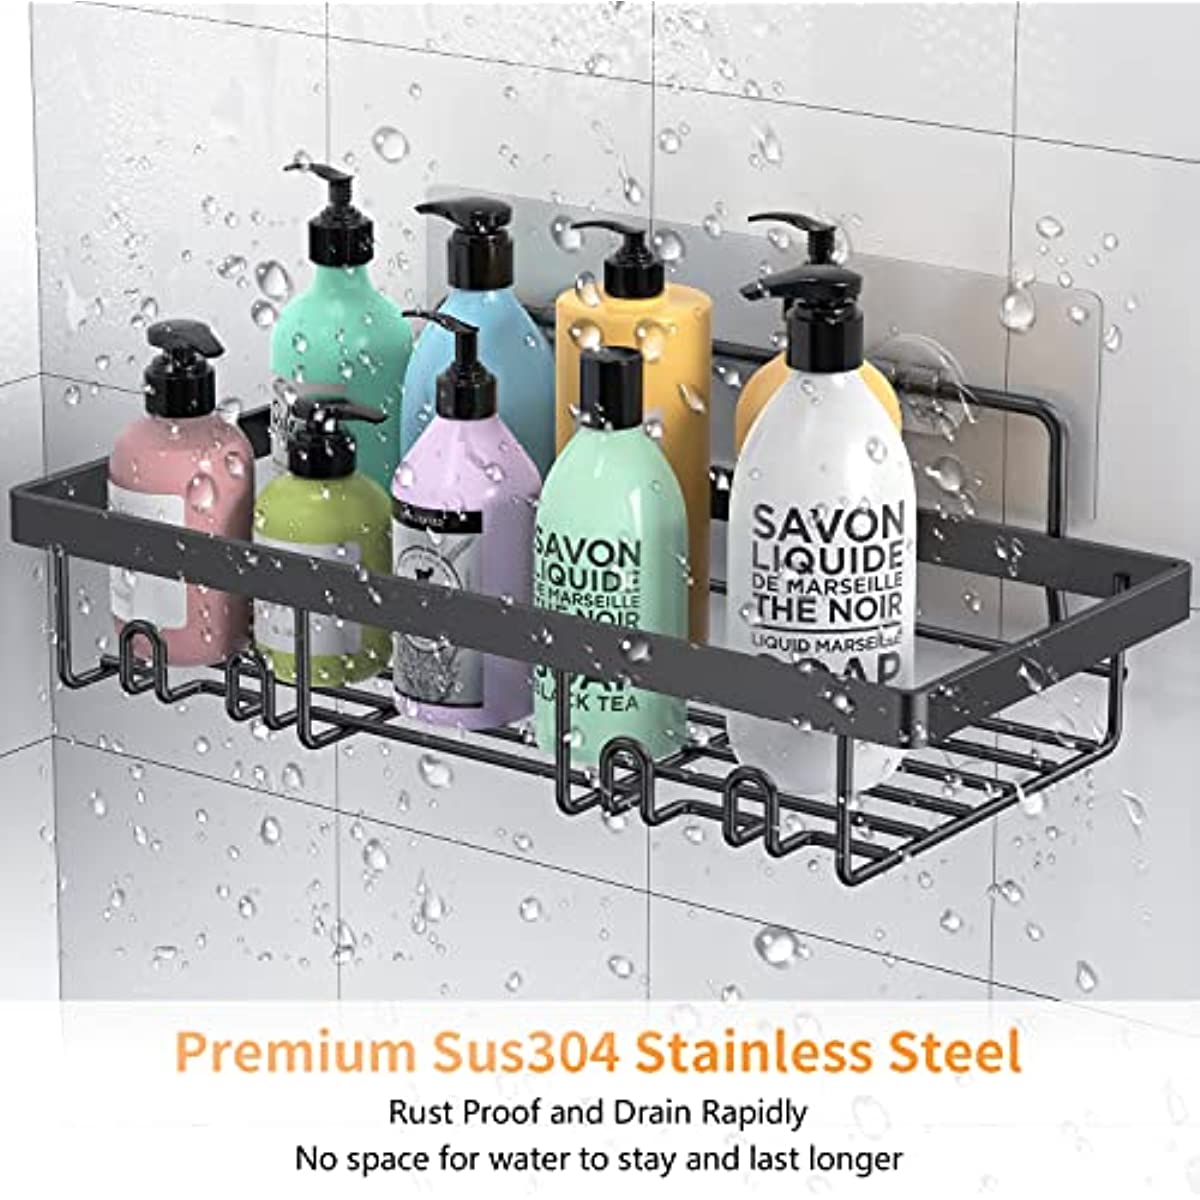 ODesign Adhesive Bathroom Shelf Organizer Shower Caddy Kitchen Spice Rack  Wall Mounted No Drilling SUS304 Stainless Steel Rustproof - 2